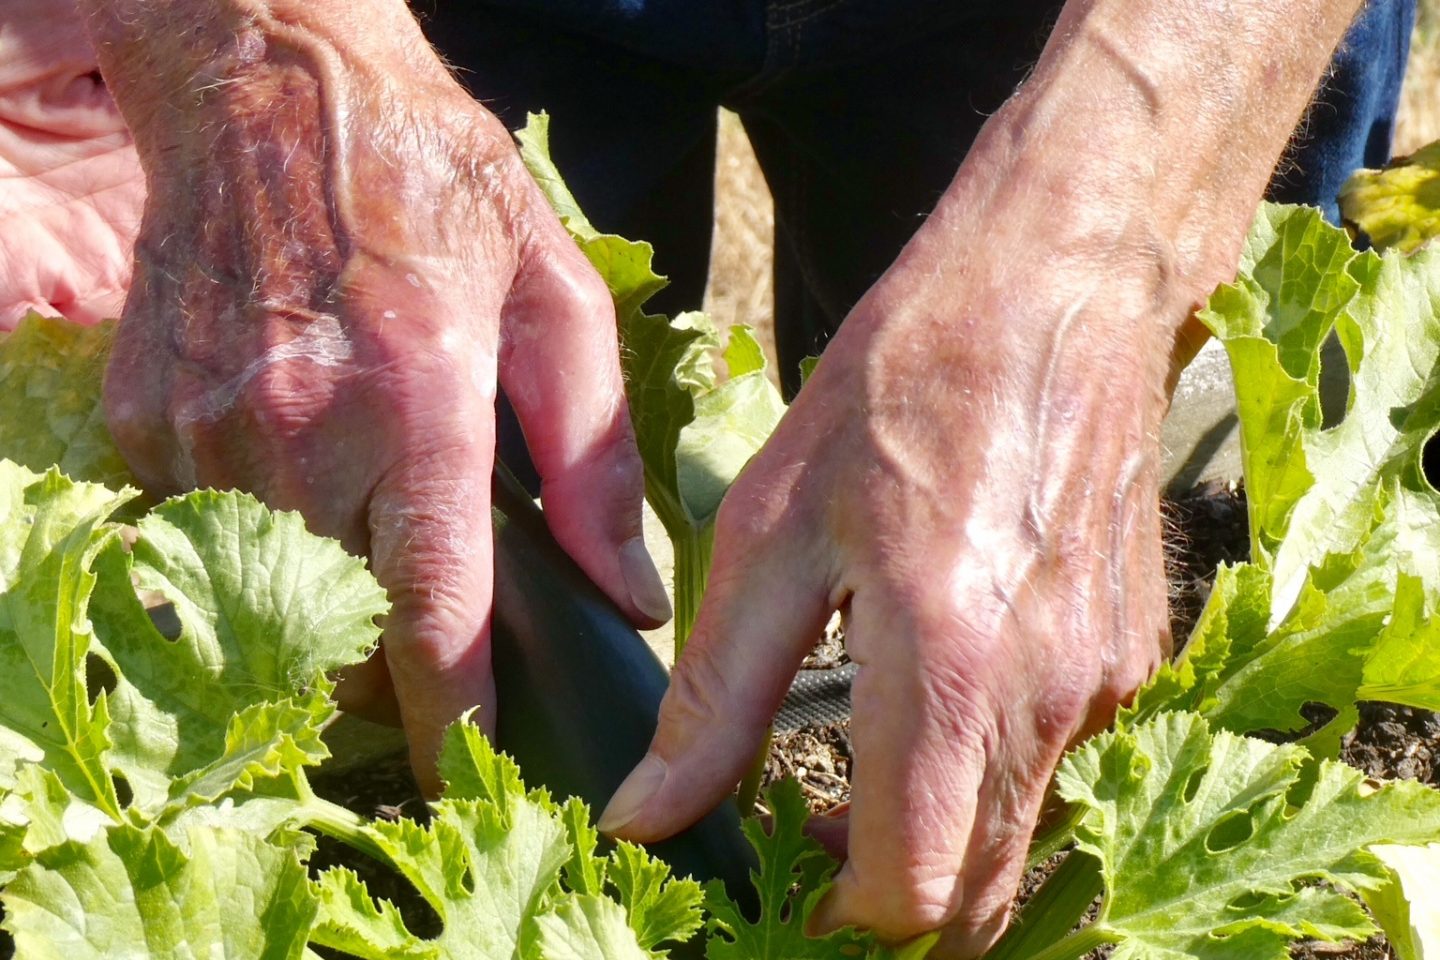 Courgette Picking Hands from dementia adventure